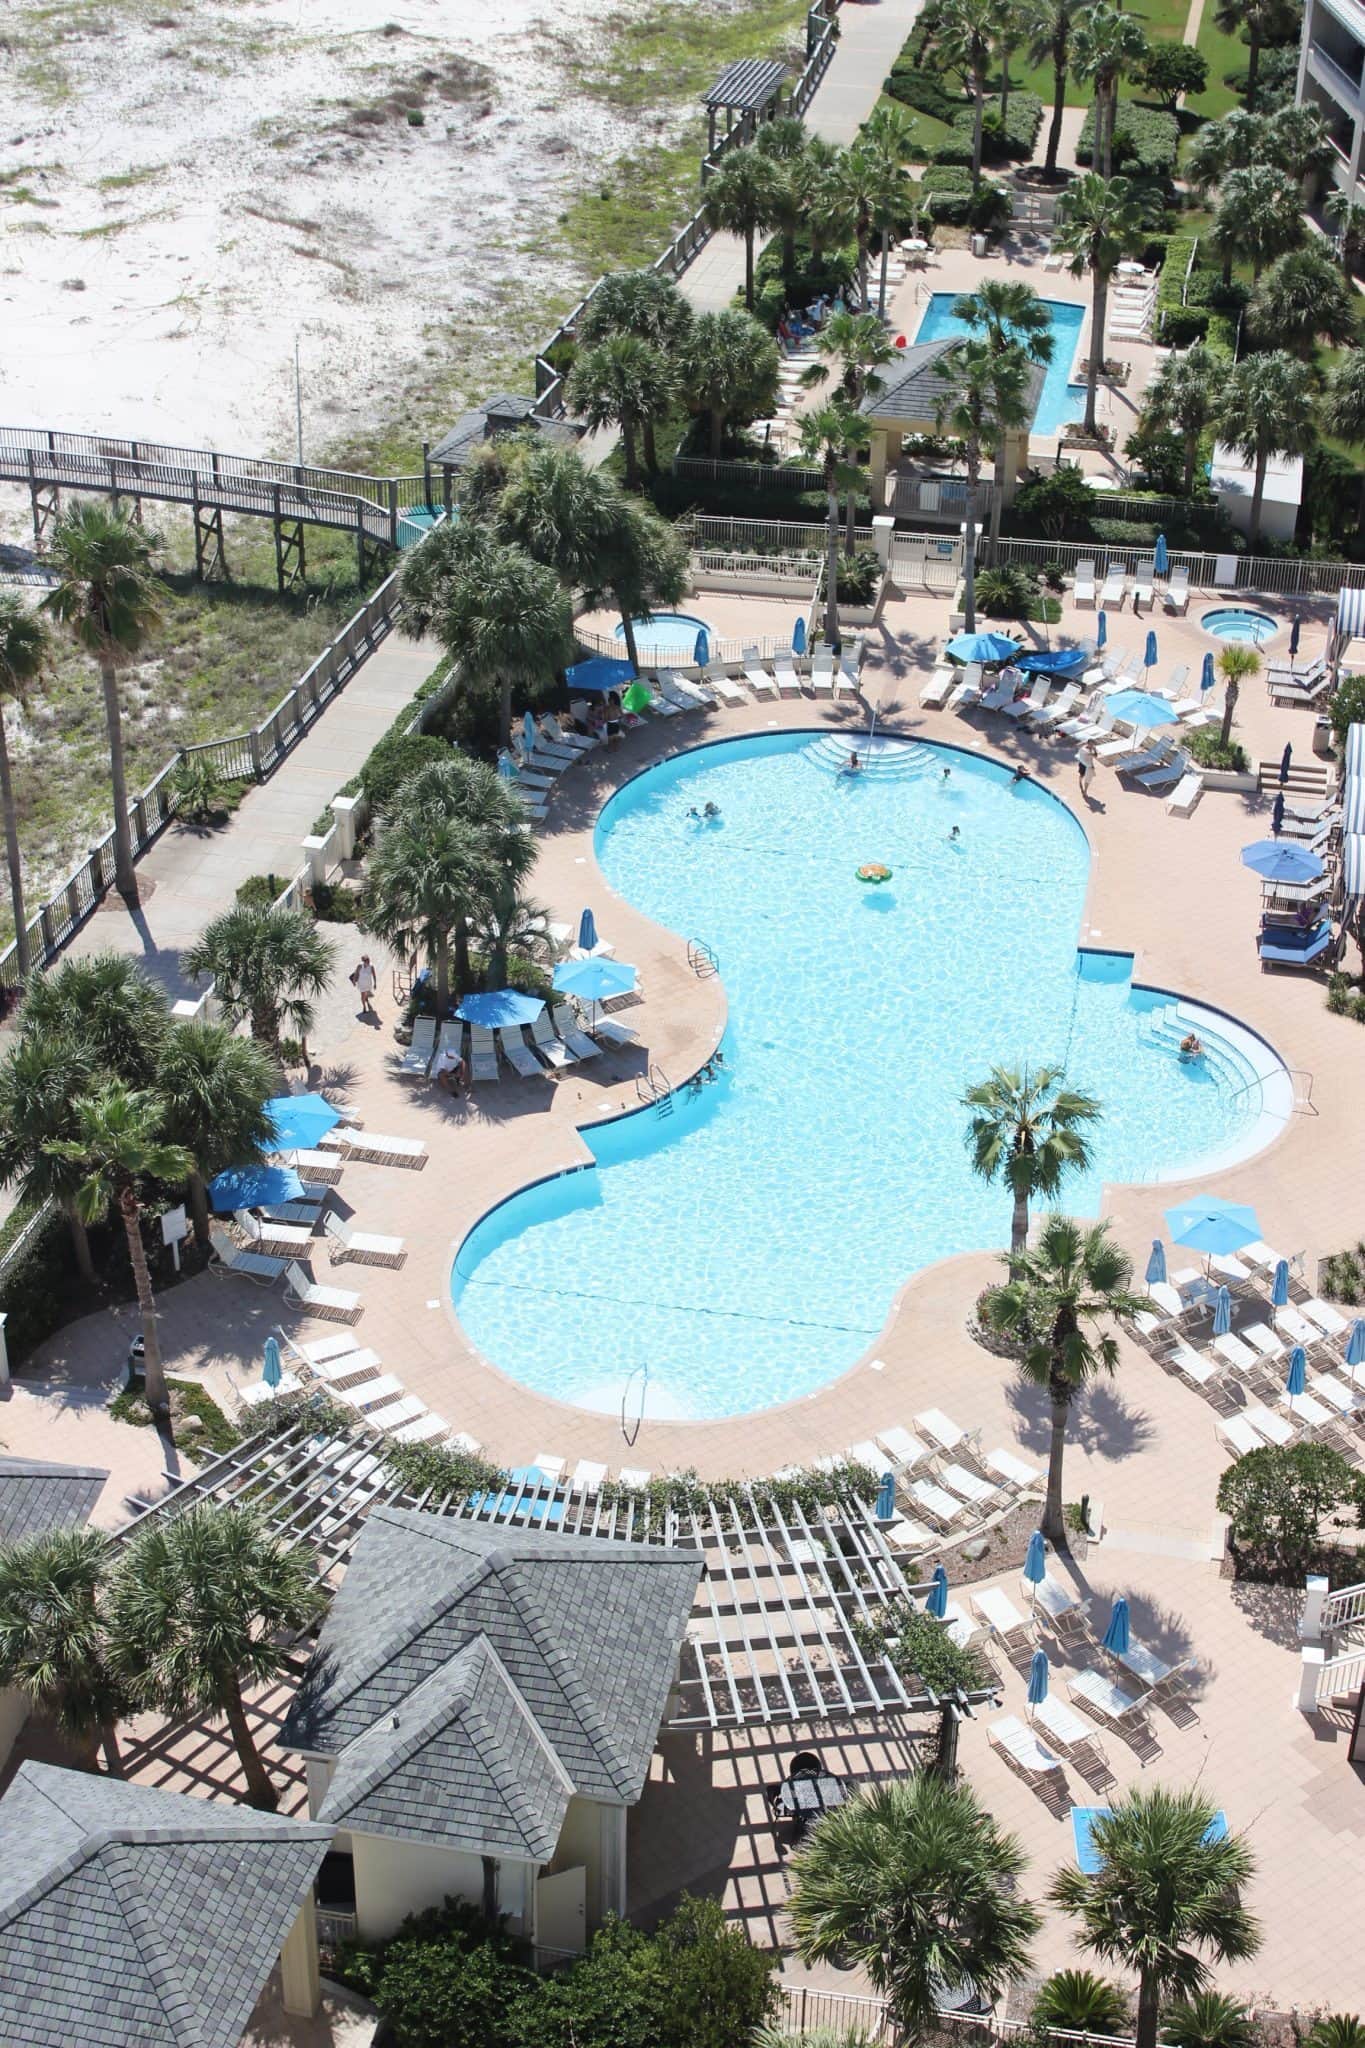 The Beach Club Gulf Shores is the ideal spot for your family beach vacation. This full service resort has so many amenities, you really don't have to leave if you don't want to. Come see why!